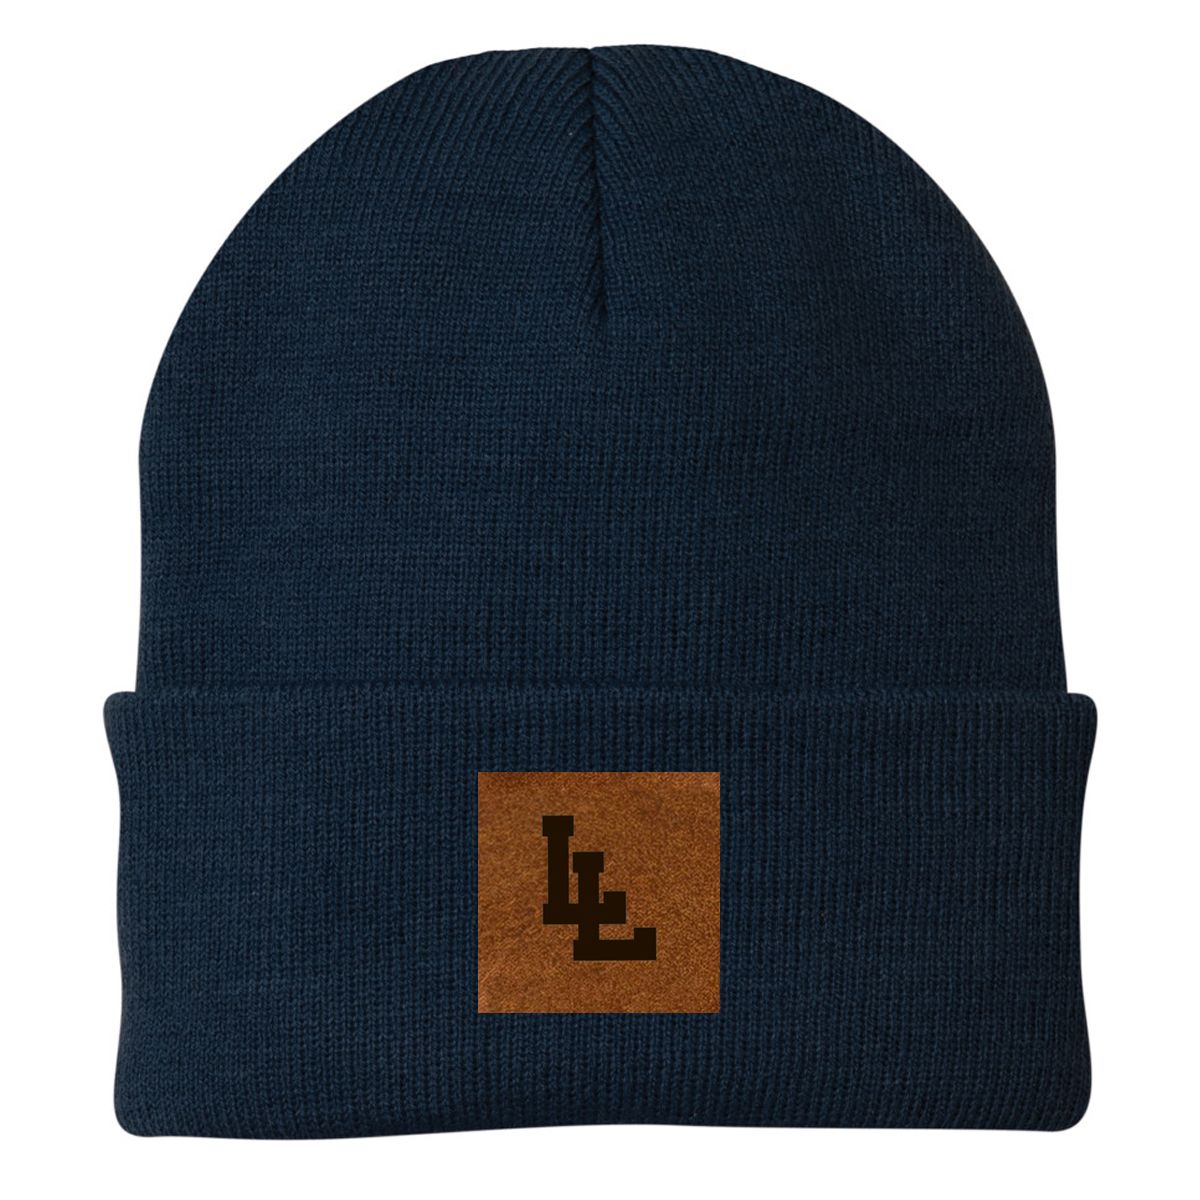 Layton High School - Knit Beanie - 3 options avialable